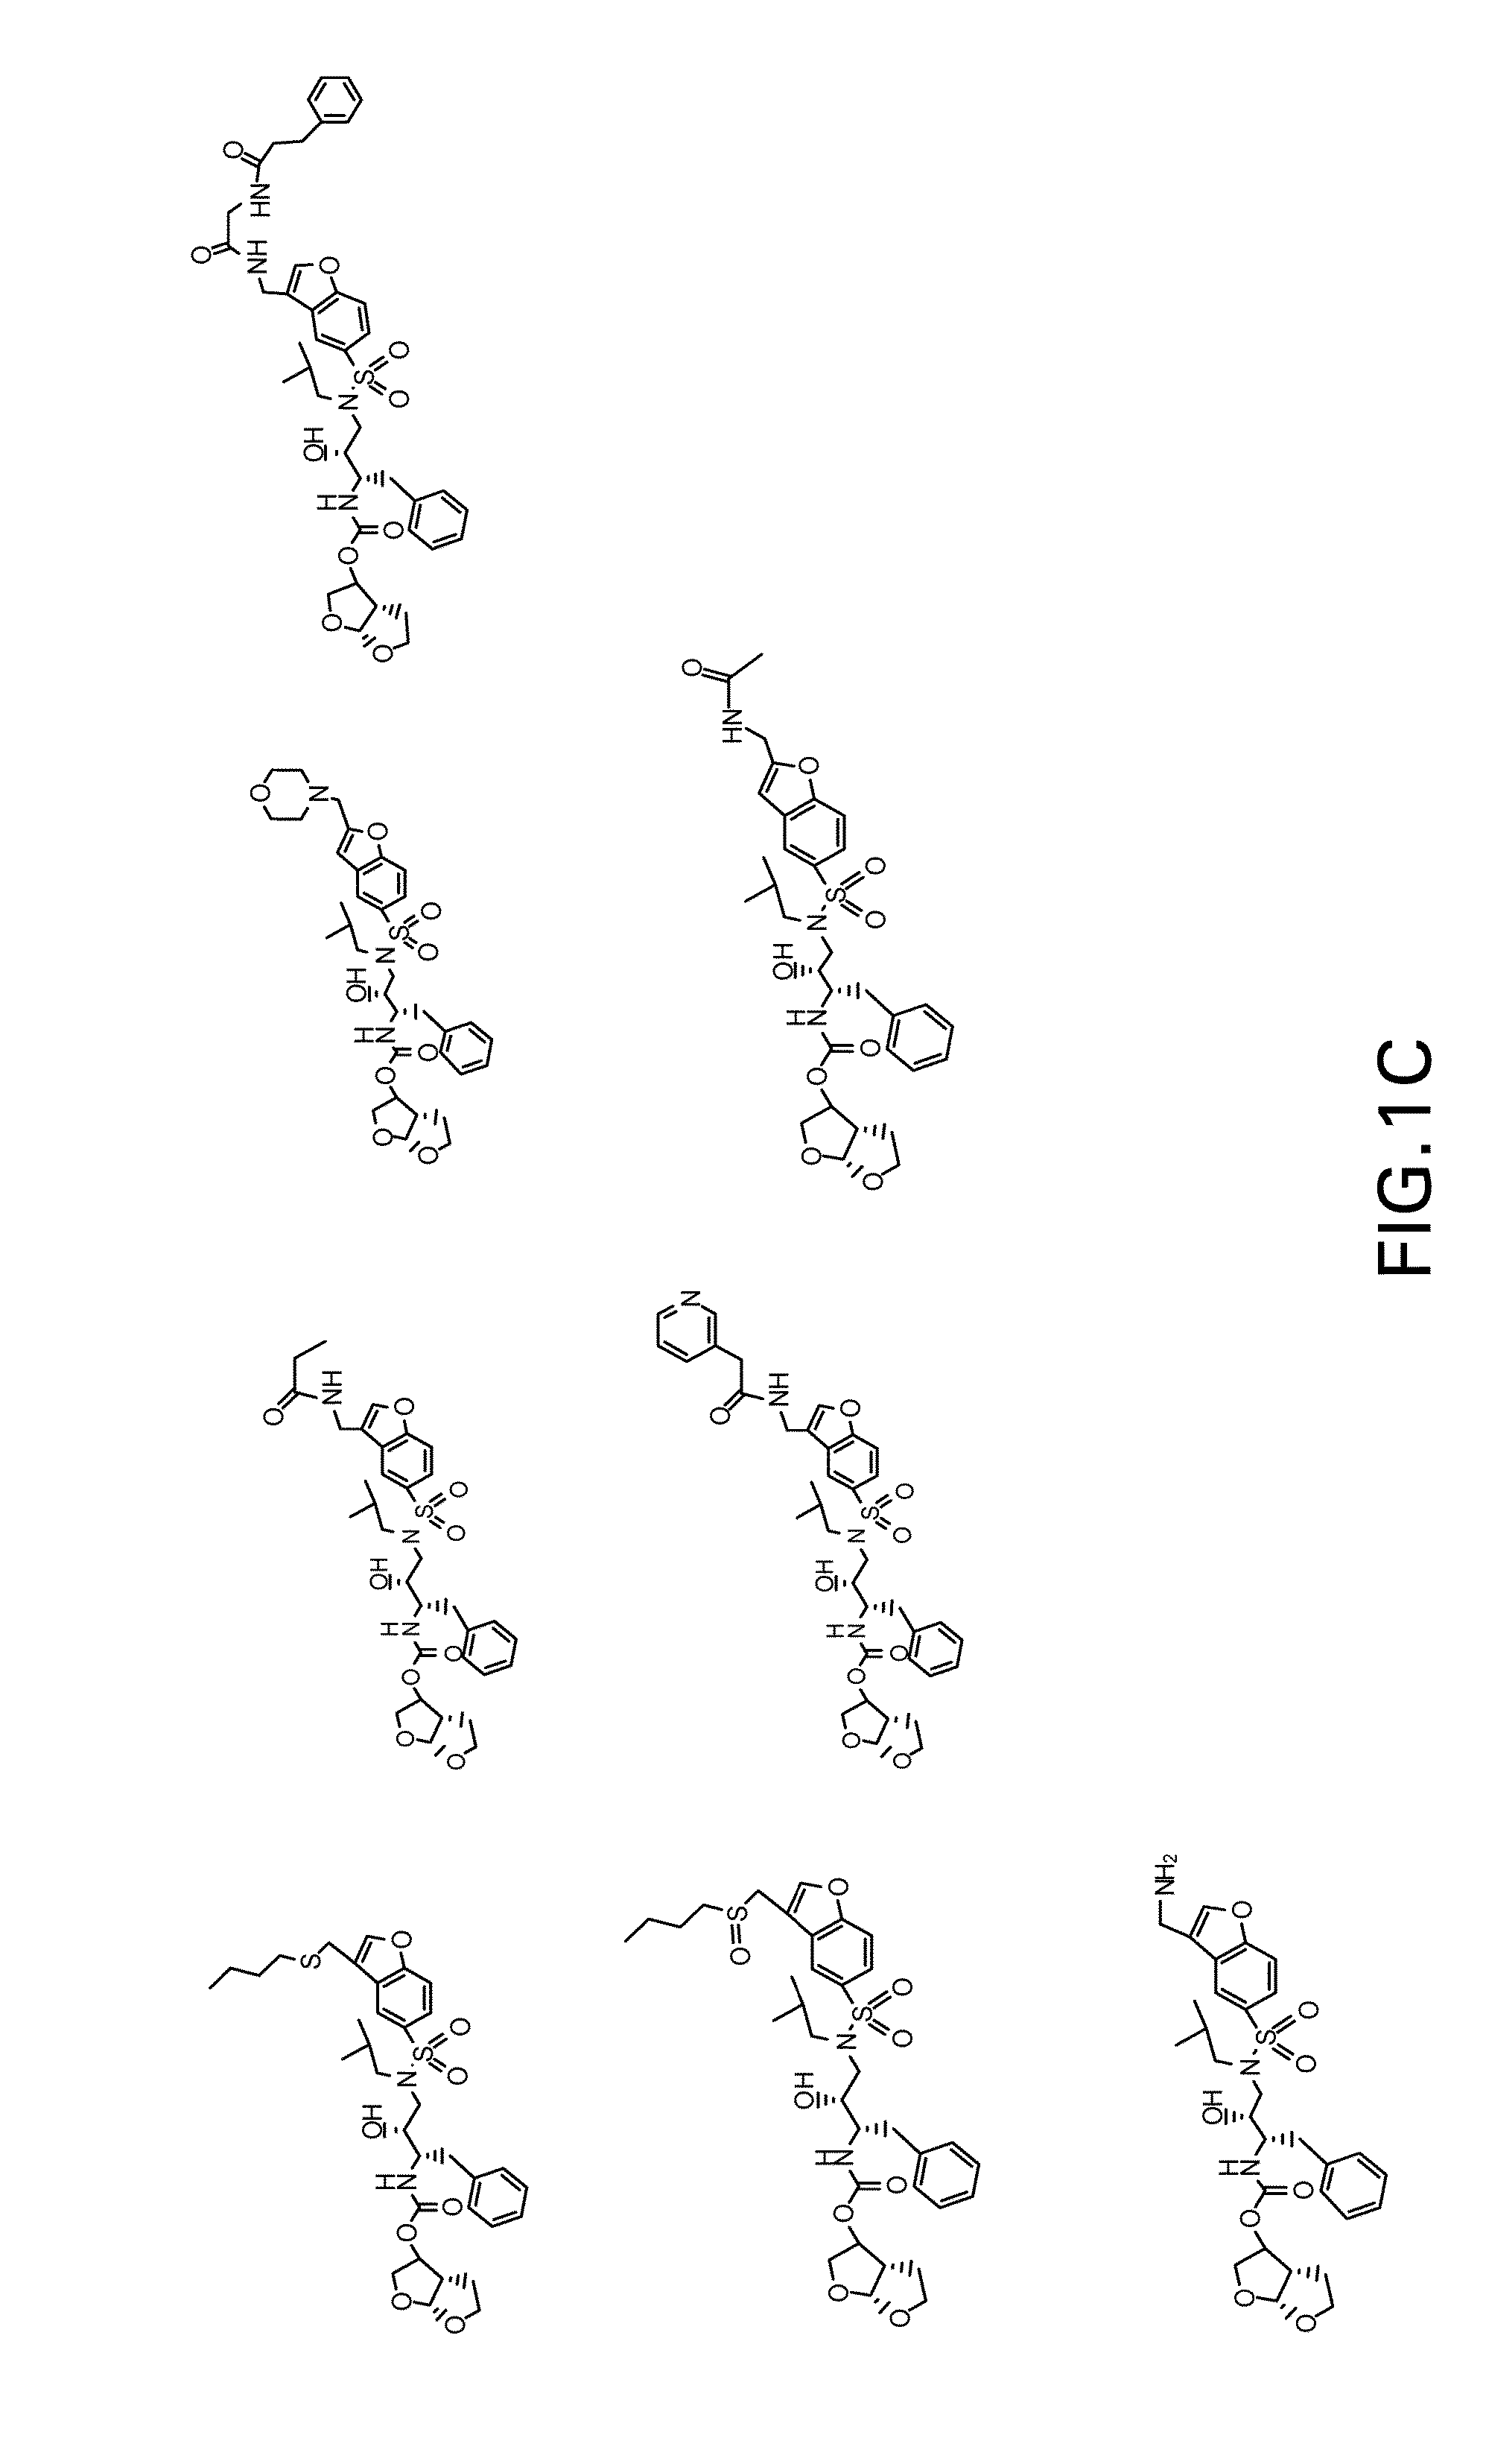 Combinations of hcv protease inhibitor(s) and cyp3a4 inhibitor(s), and methods of treatment related thereto